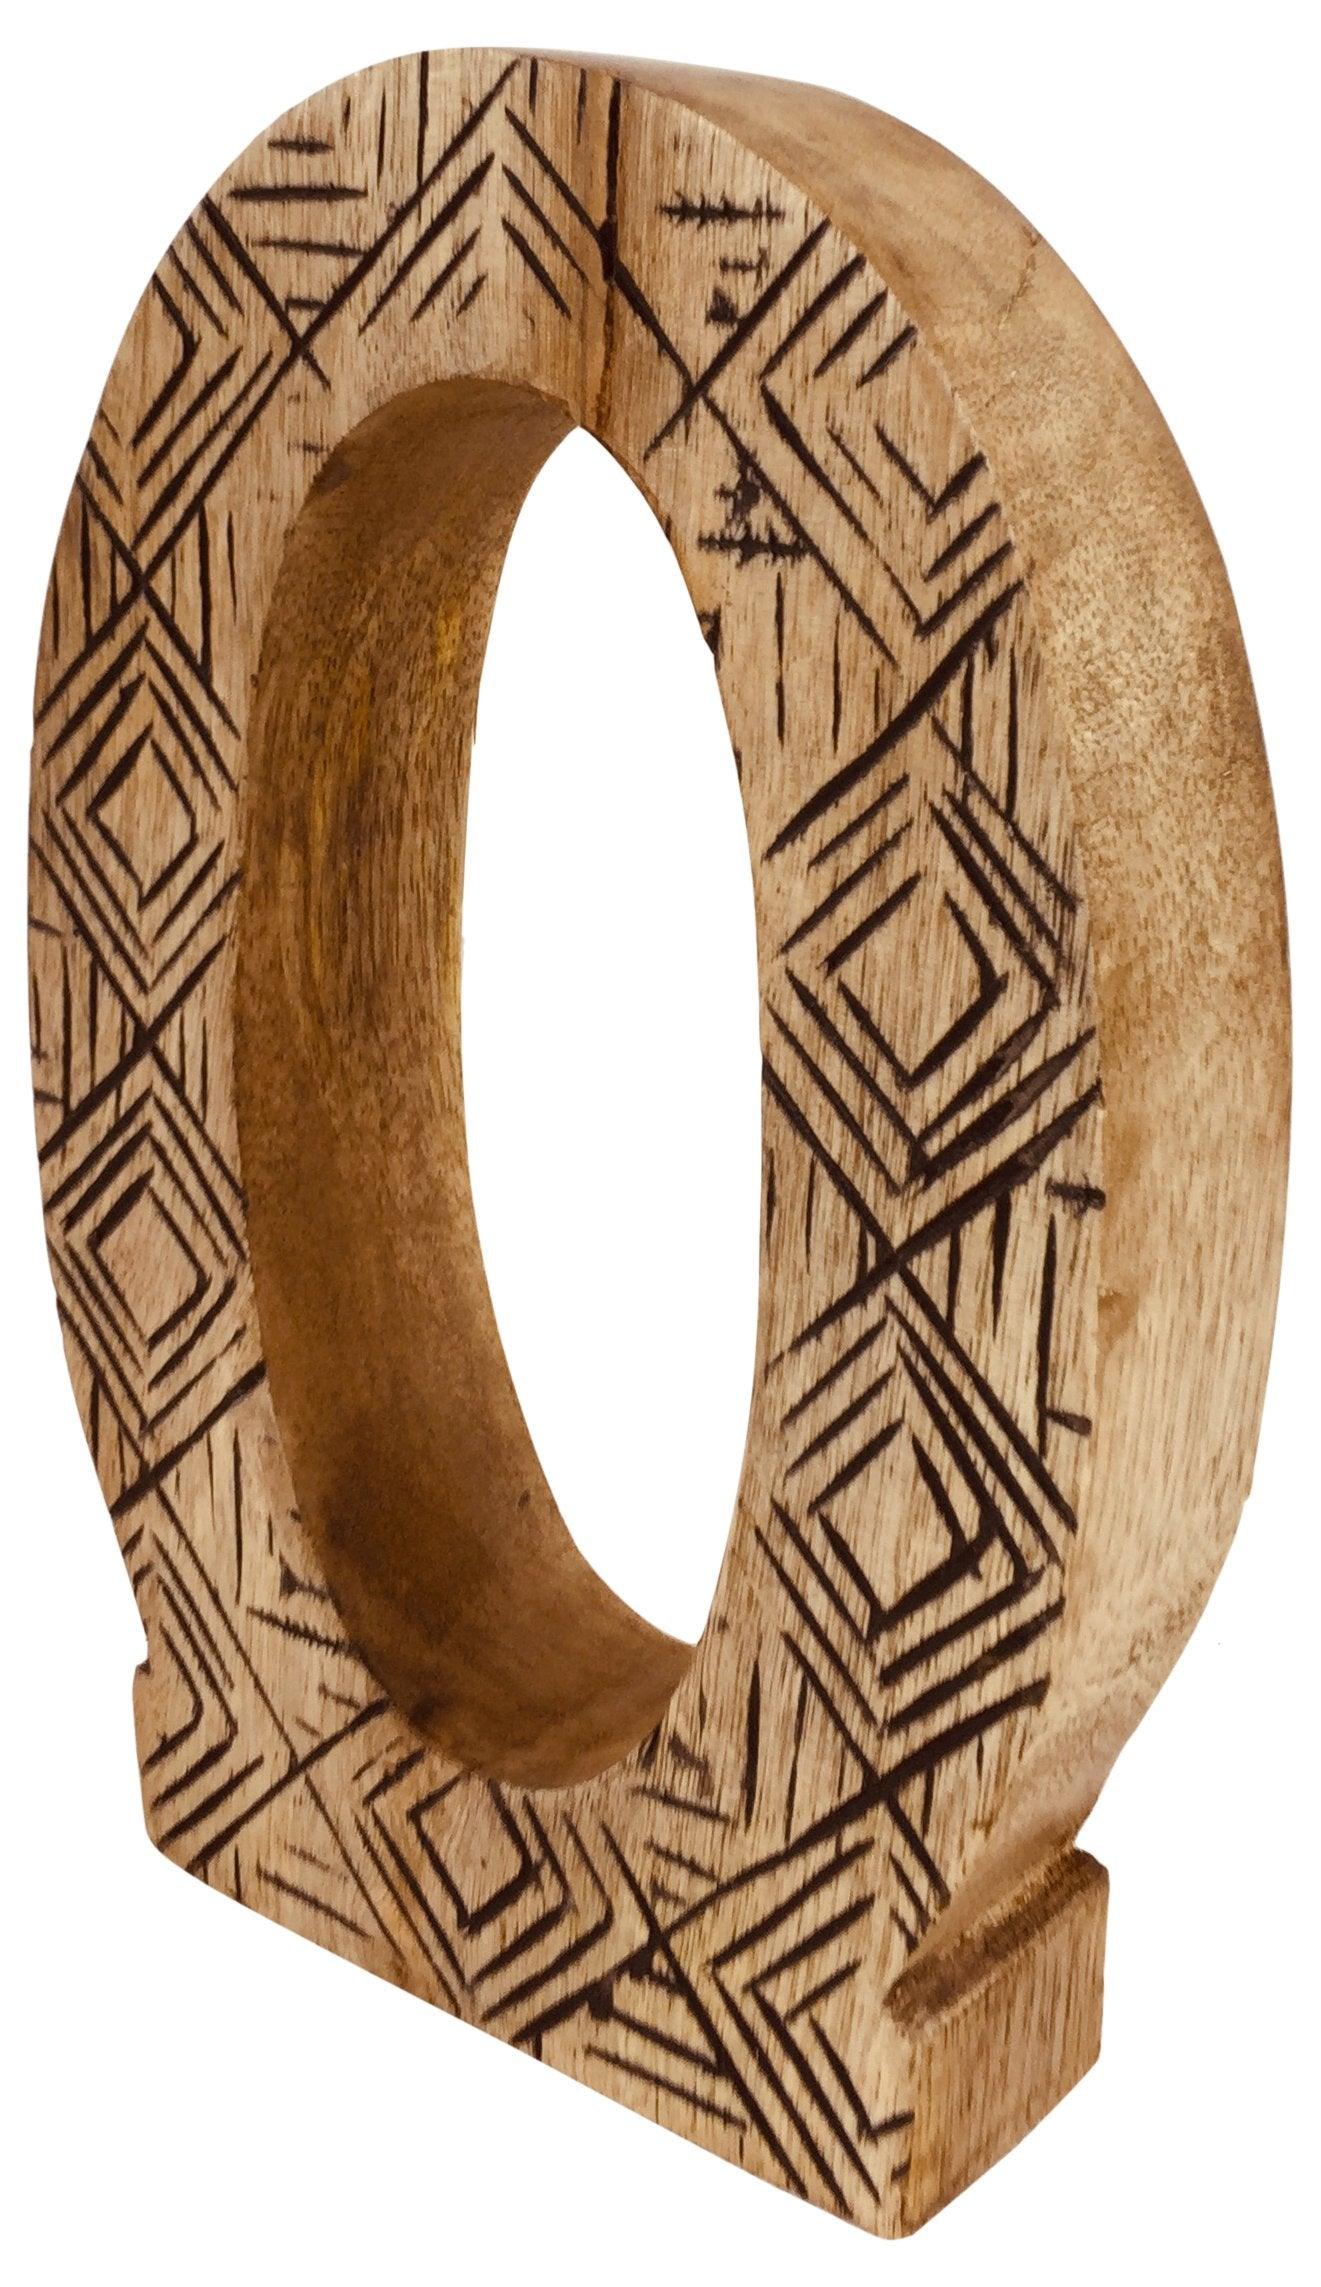 View Hand Carved Wooden Geometric Letter O information